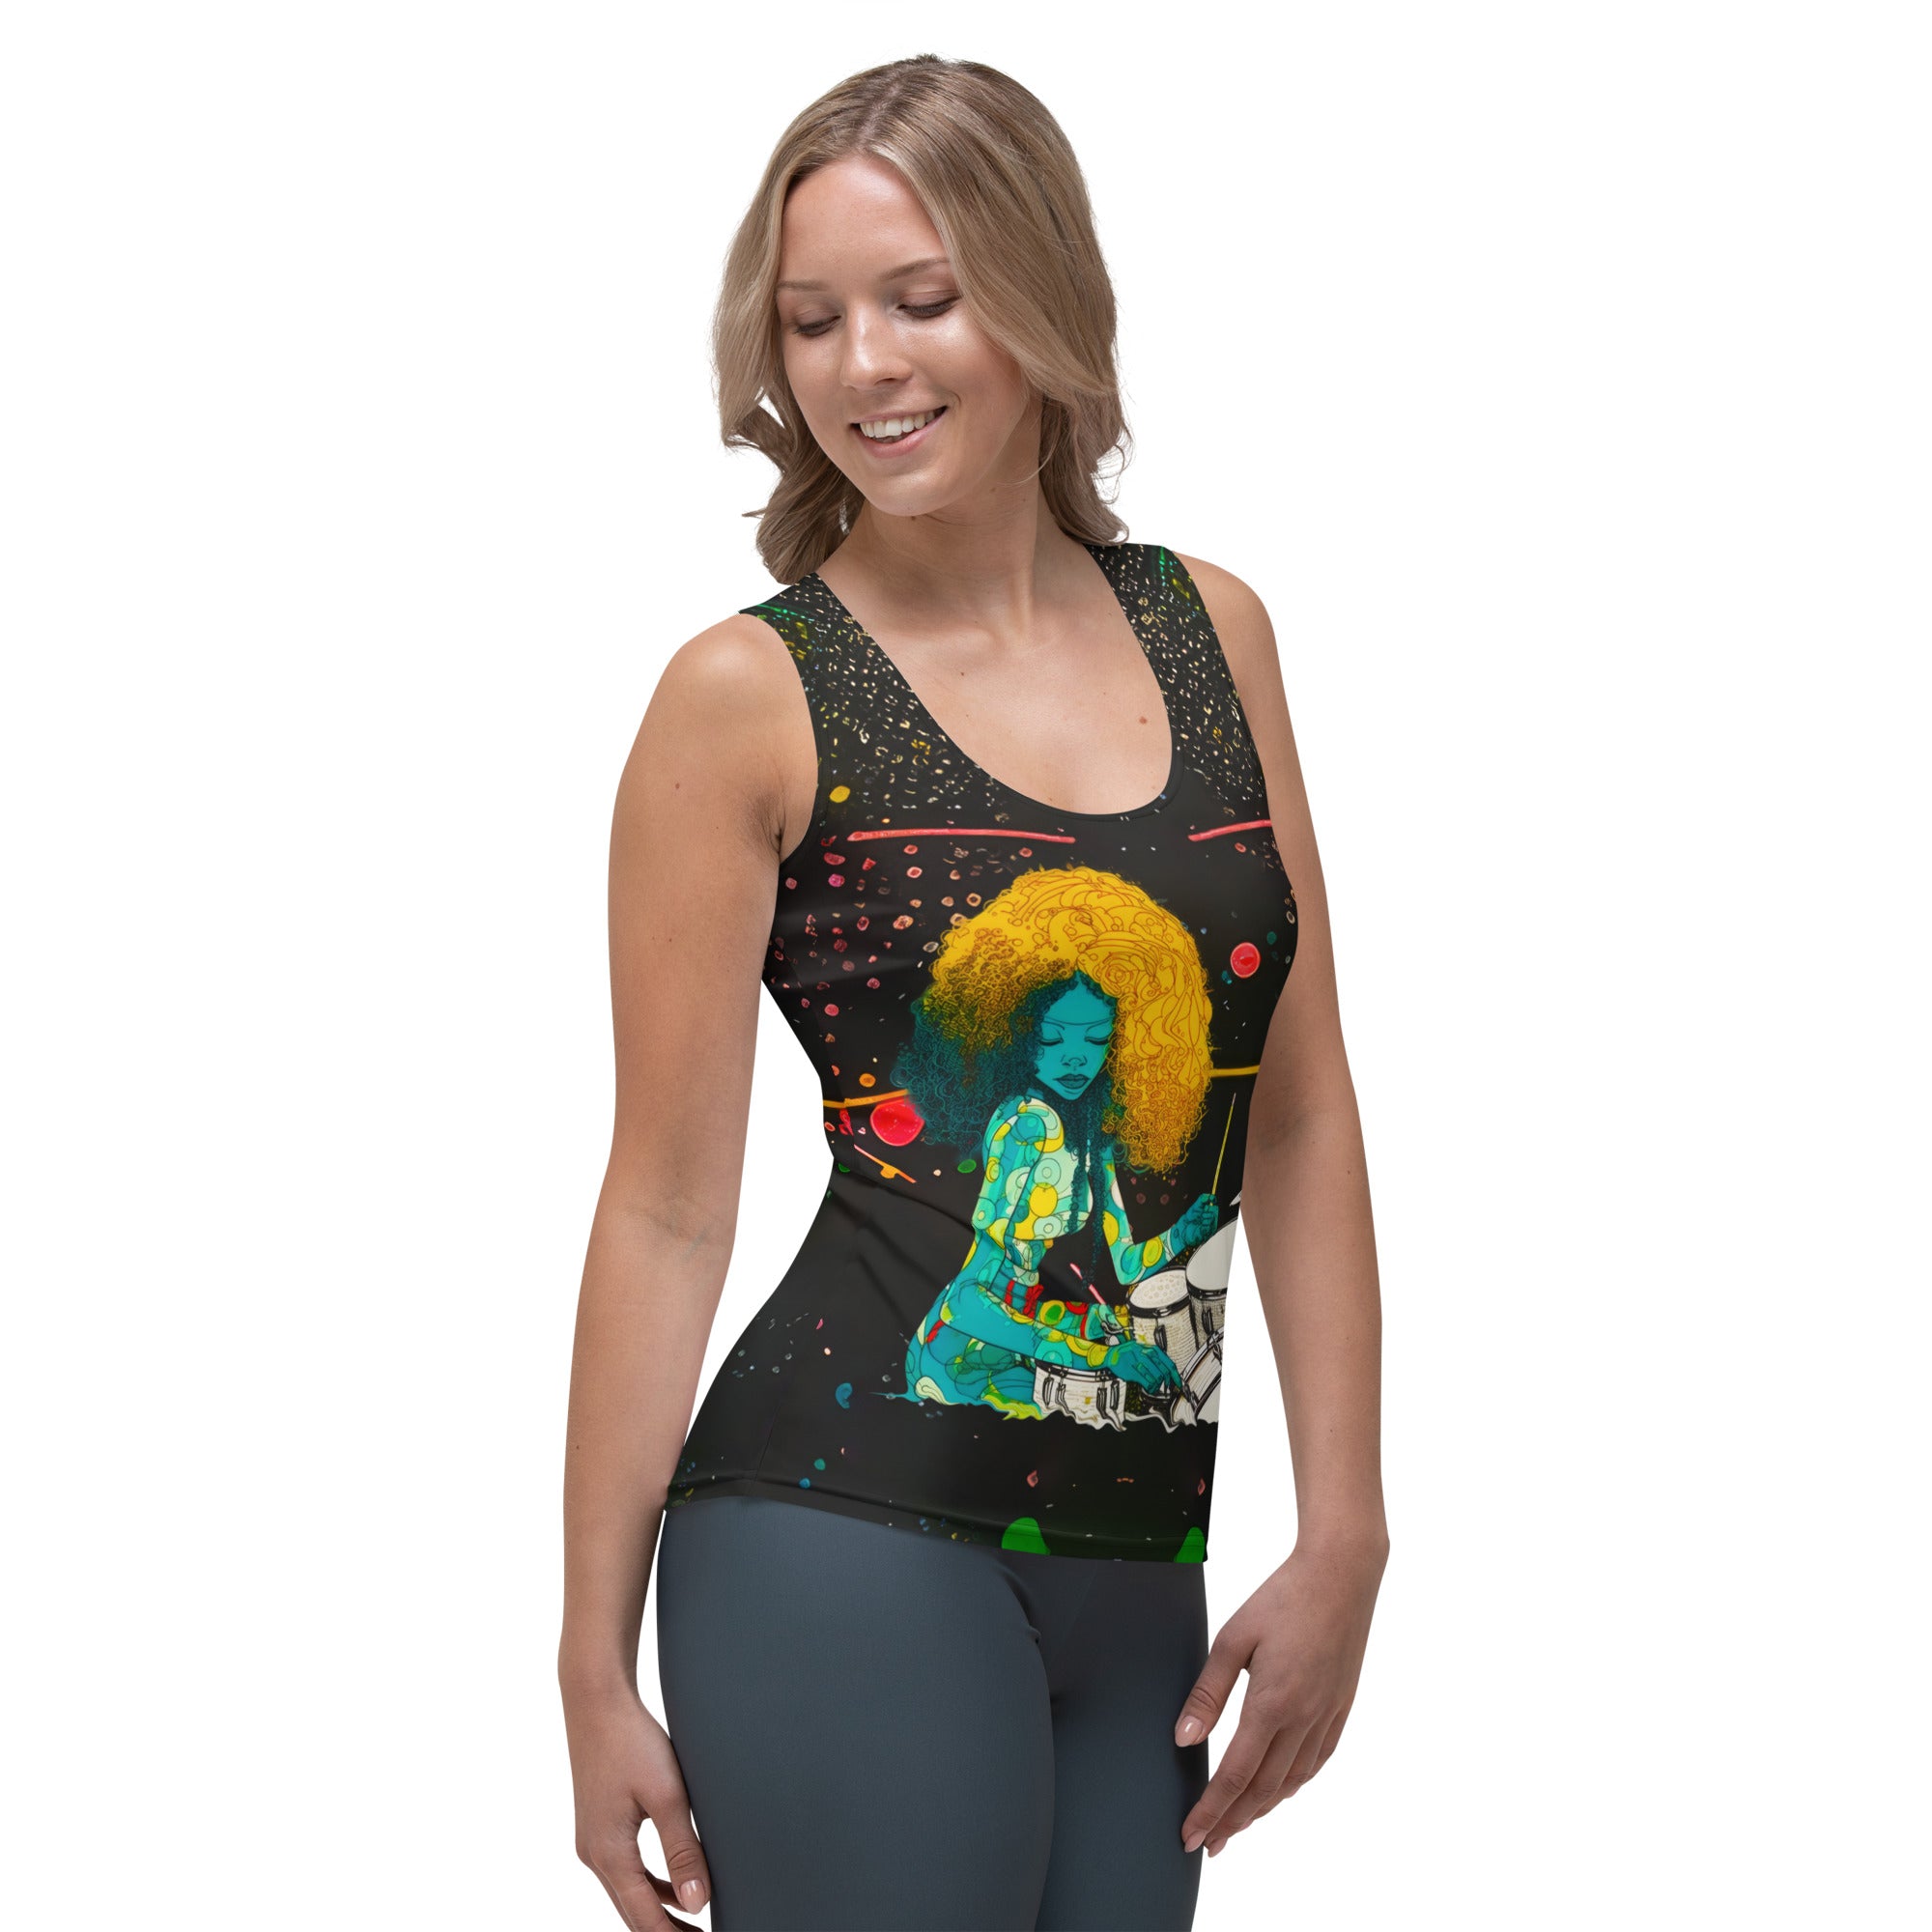 Floral Fantasy Women's Tank Top displayed on a clothing rack.